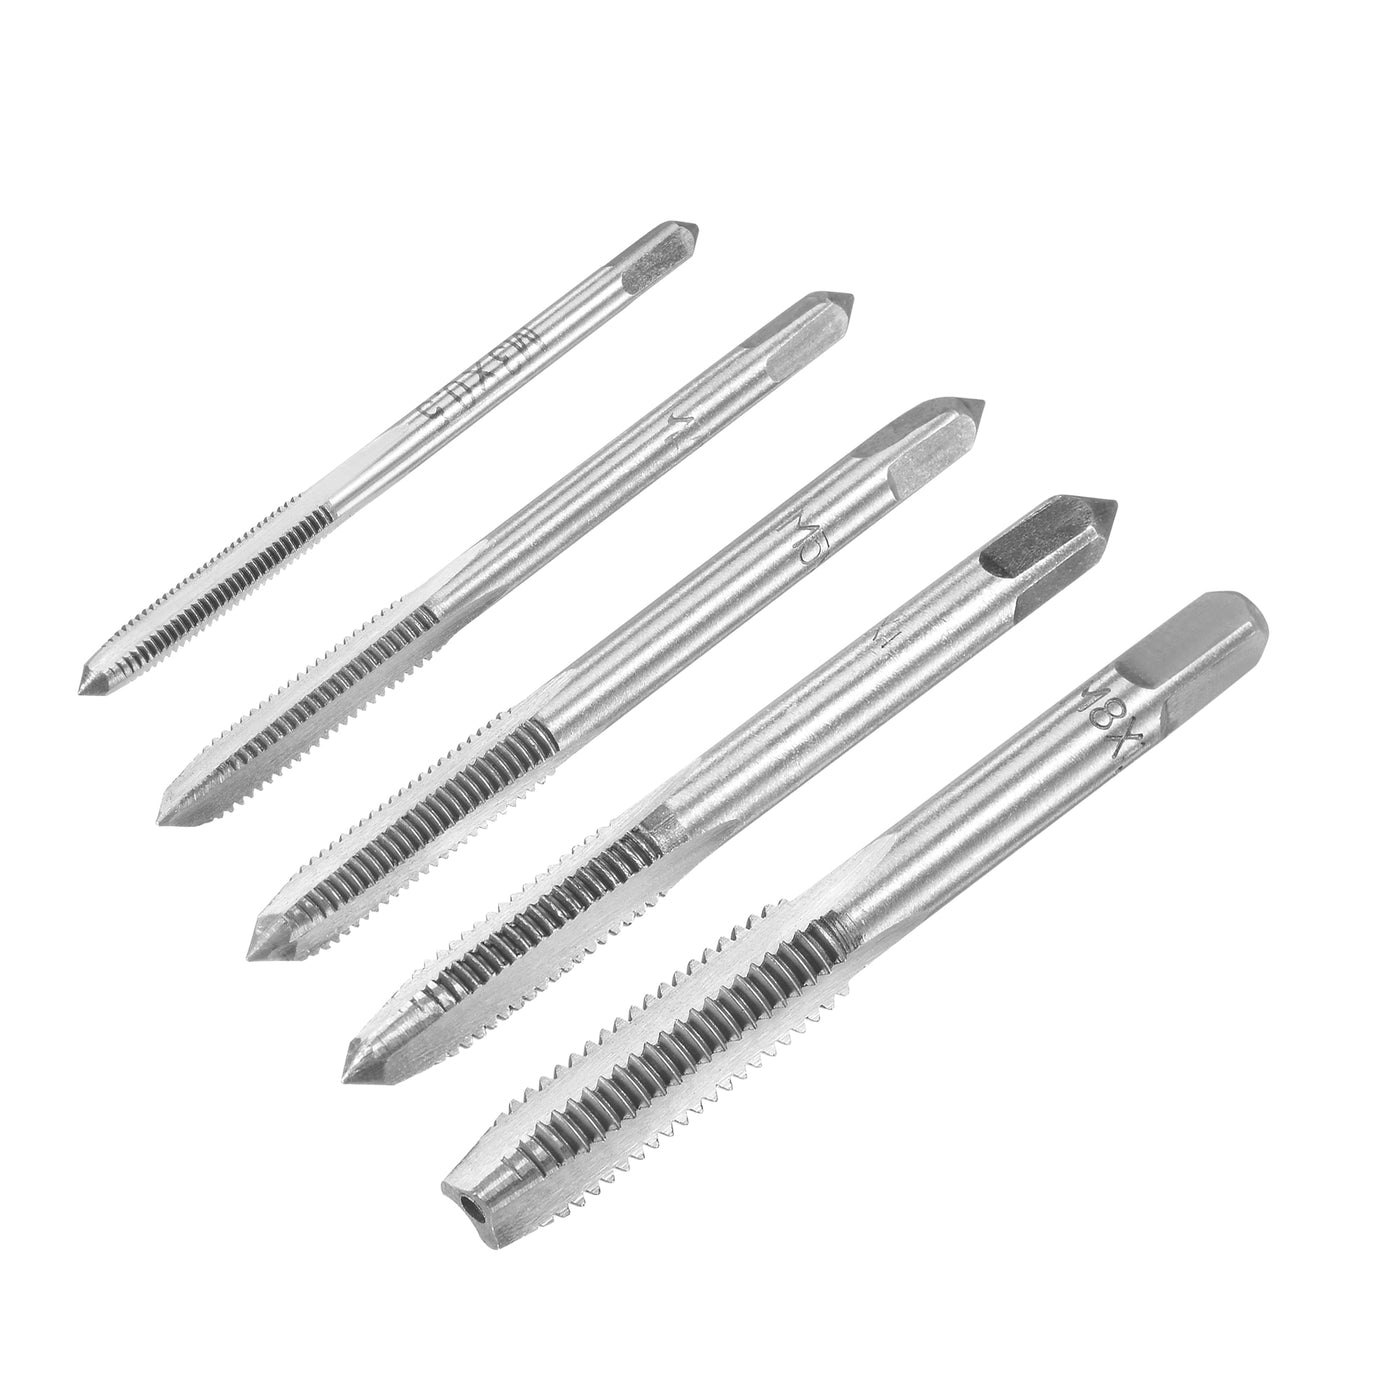 Uxcell Uxcell M3 M4 M5 M6 M8 Hand Threading Tap Set High Speed Steel Straight Flutes Metric Thread Screw Taps Bluing 5pcs